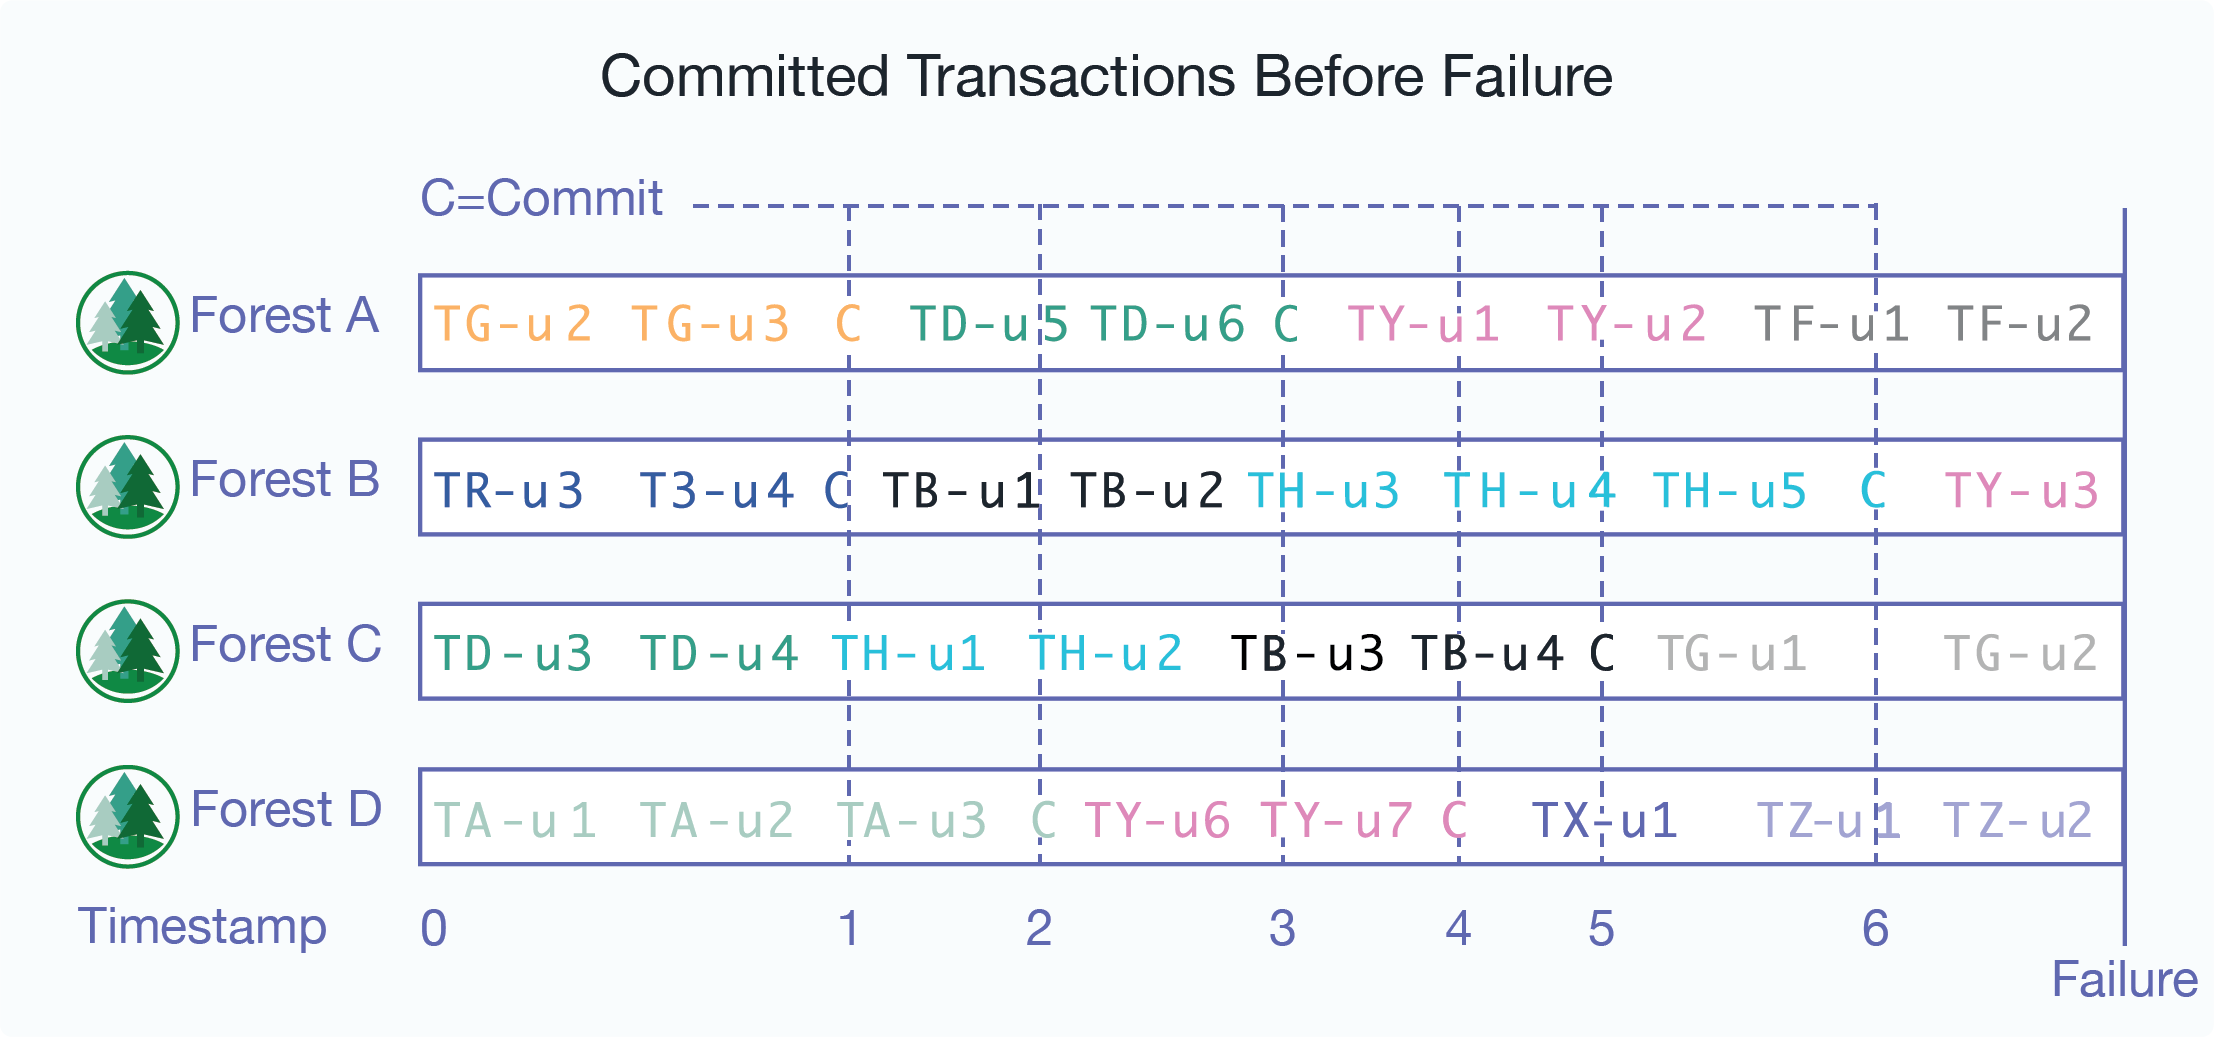 Graphic showing committed transactions before failure.